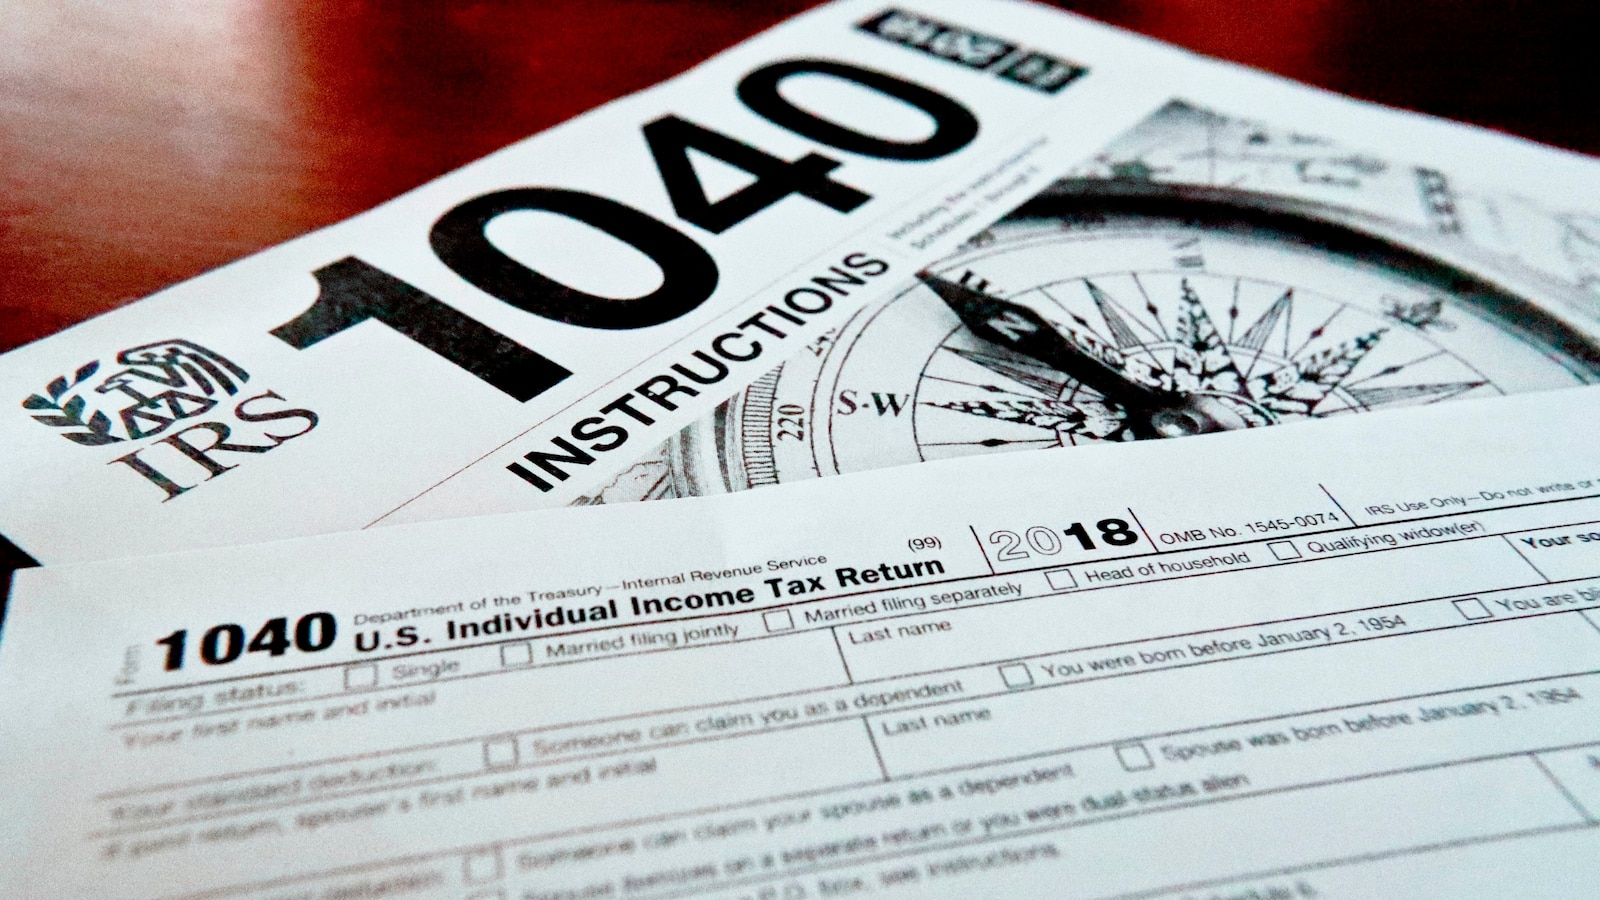 IRS to Simplify and Redesign Tax Notices for Improved Clarity and Ease of Use